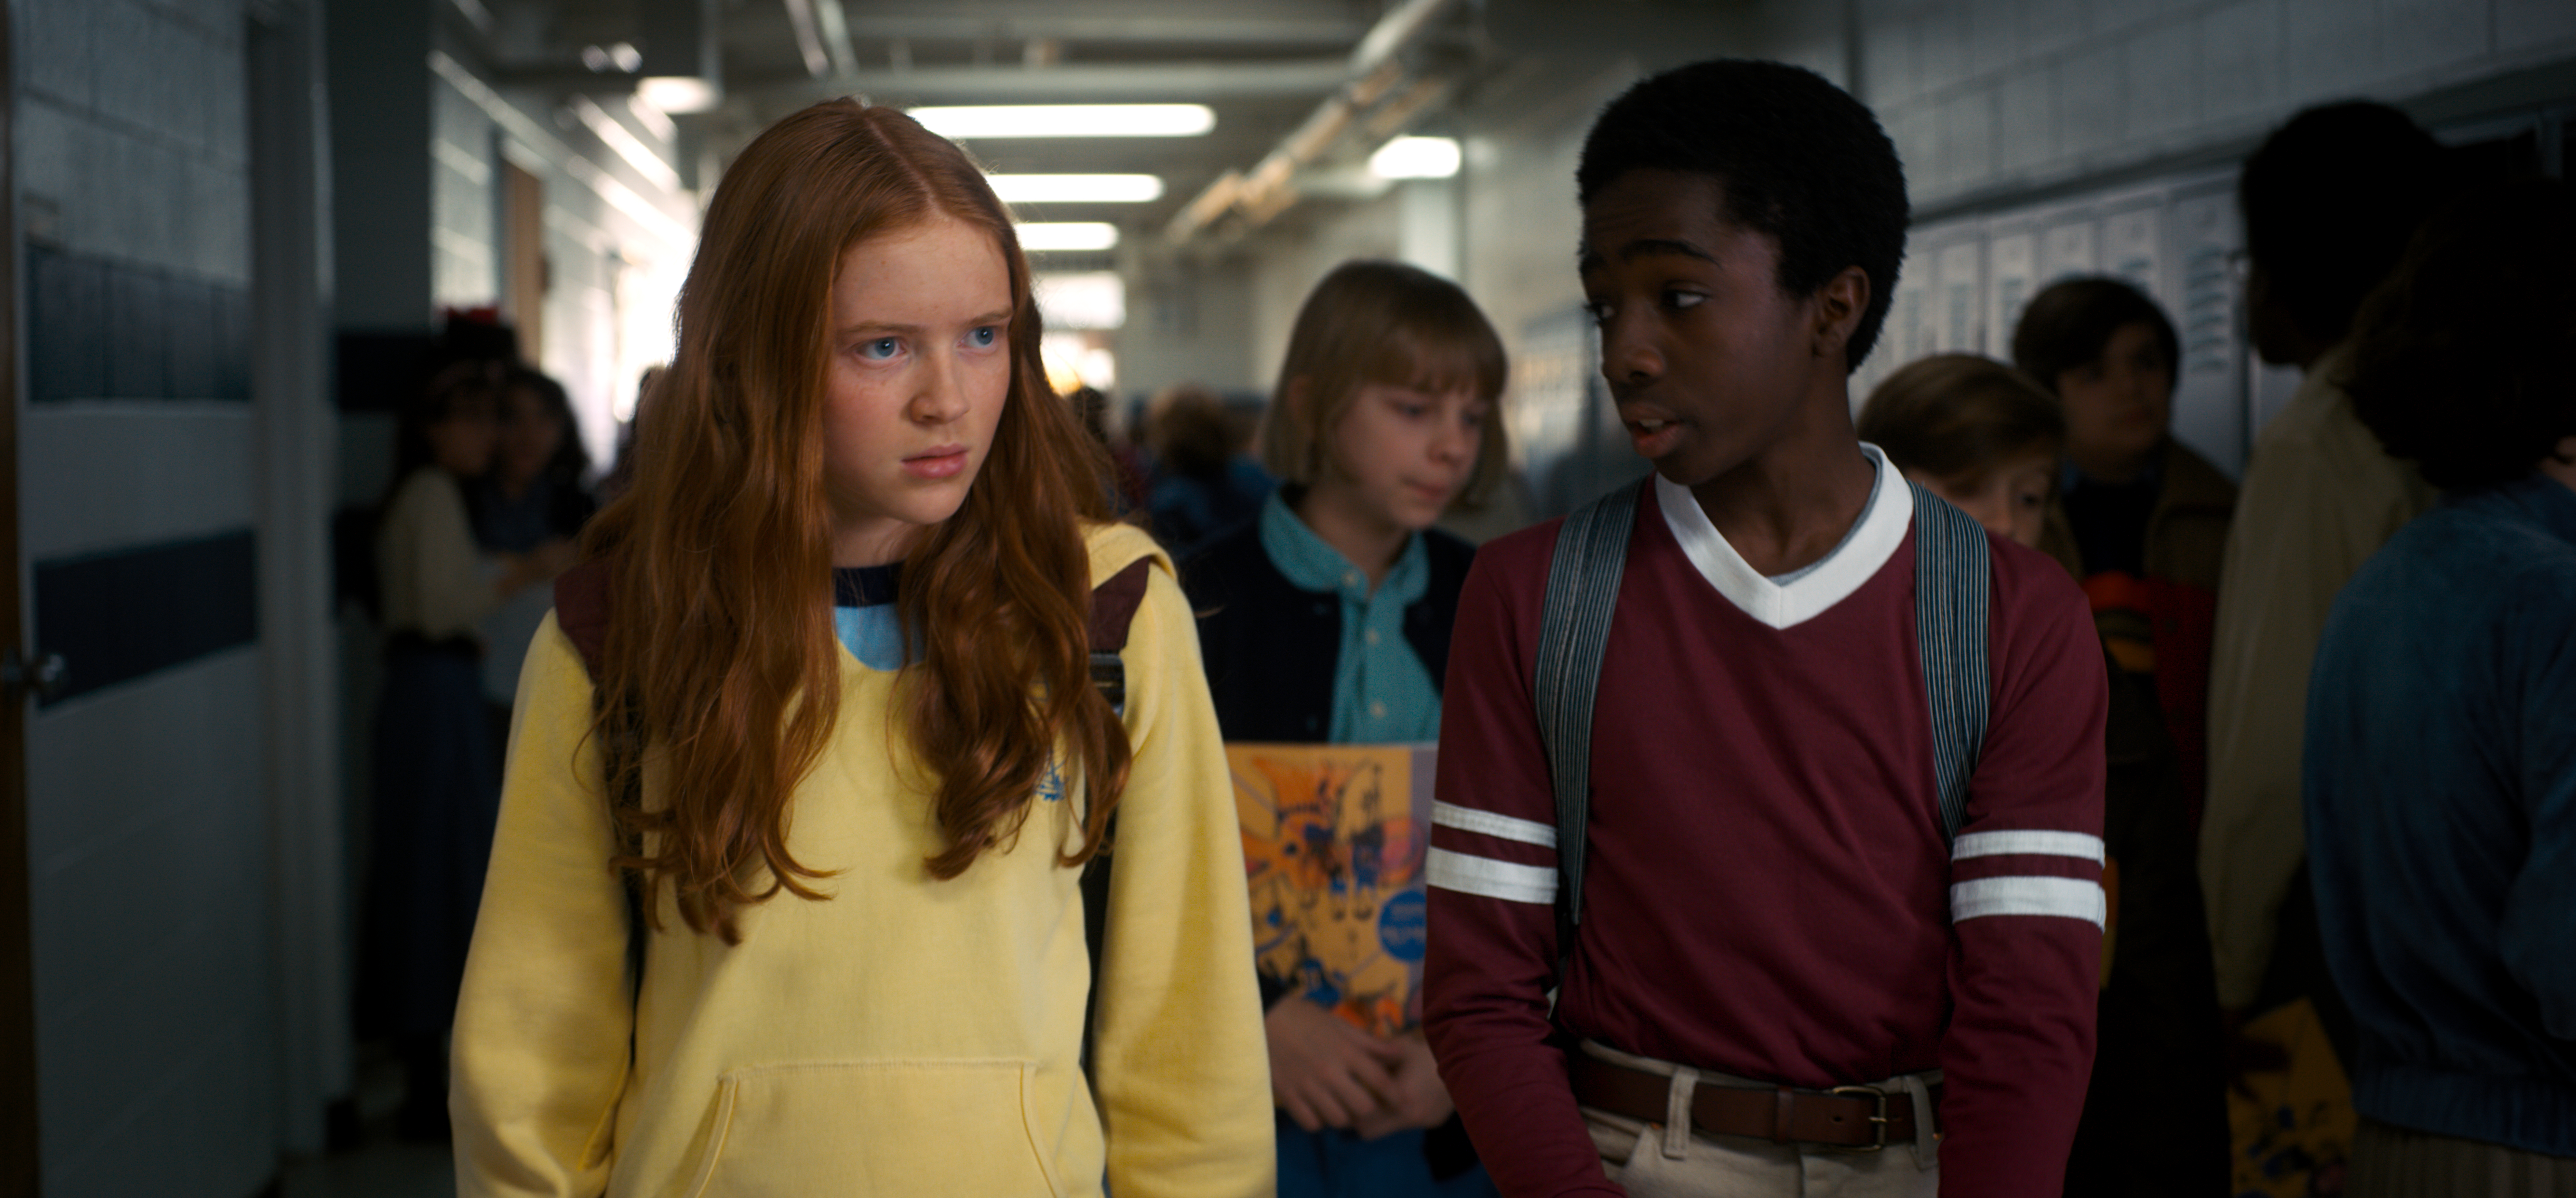 Sadie Sink (Max) and Caleb McLaughlin (Lucas) in a Netflix production still from Stranger Things 2